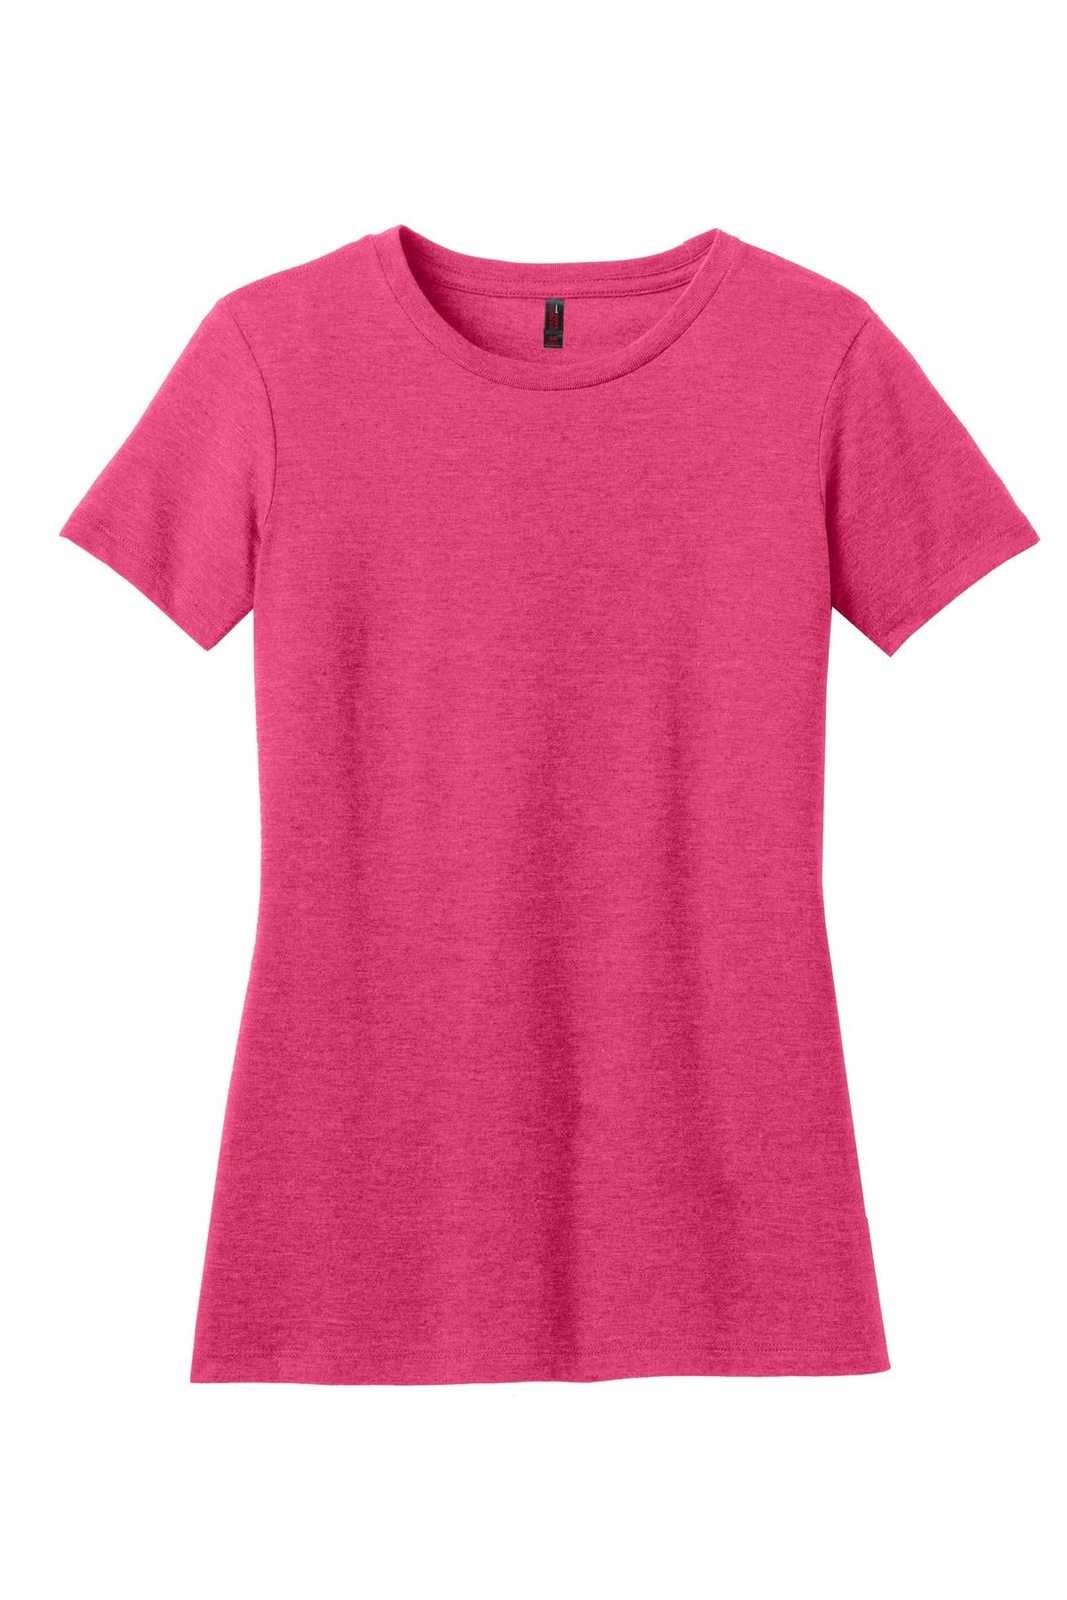 District DM108L Women's Perfect Blend Tee - Heathered Watermelon - HIT a Double - 1